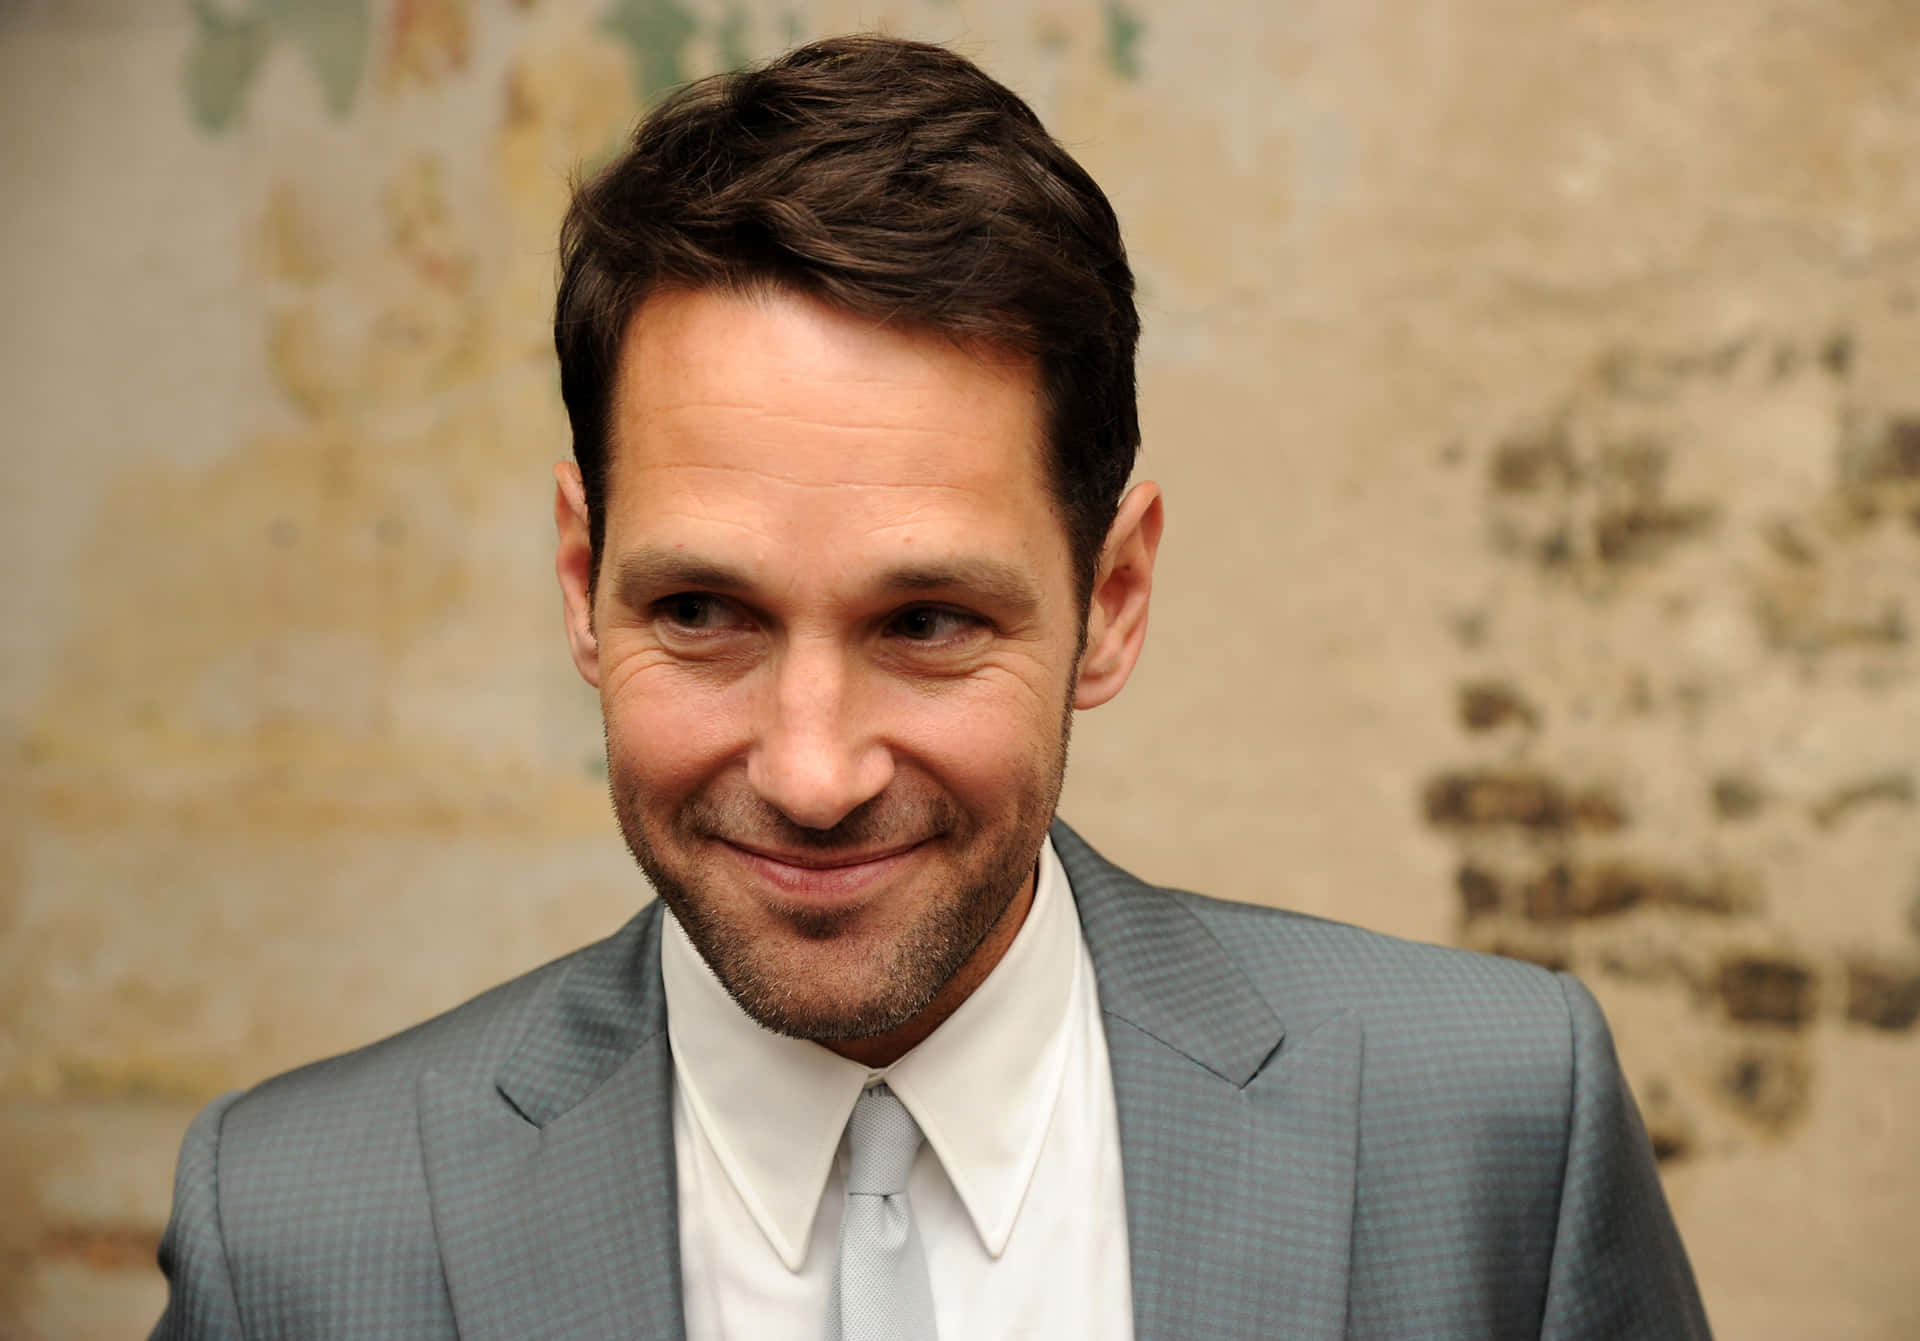 Actor Paul Rudd on the red carpet. Wallpaper